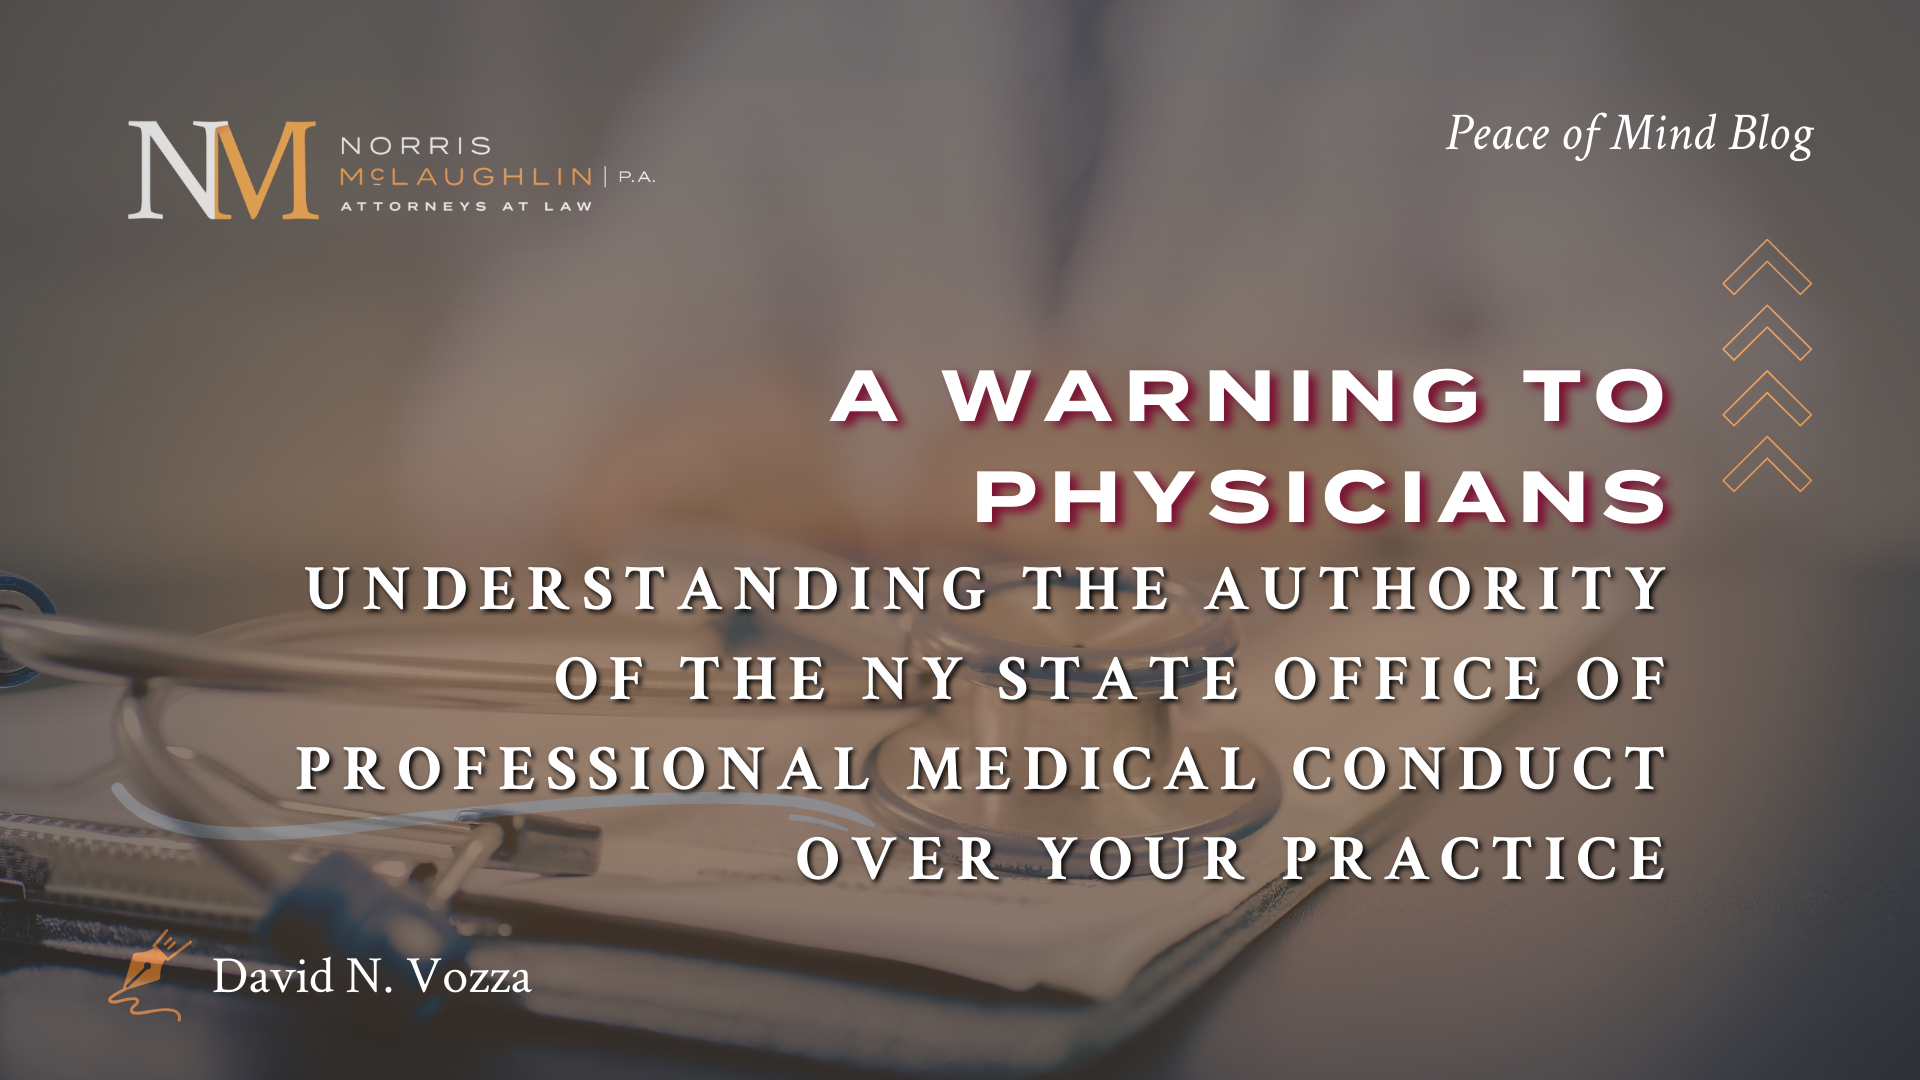 A Warning to Physicians: Understanding the Authority of the New York State Office of Professional Medical Conduct Over Your Practice